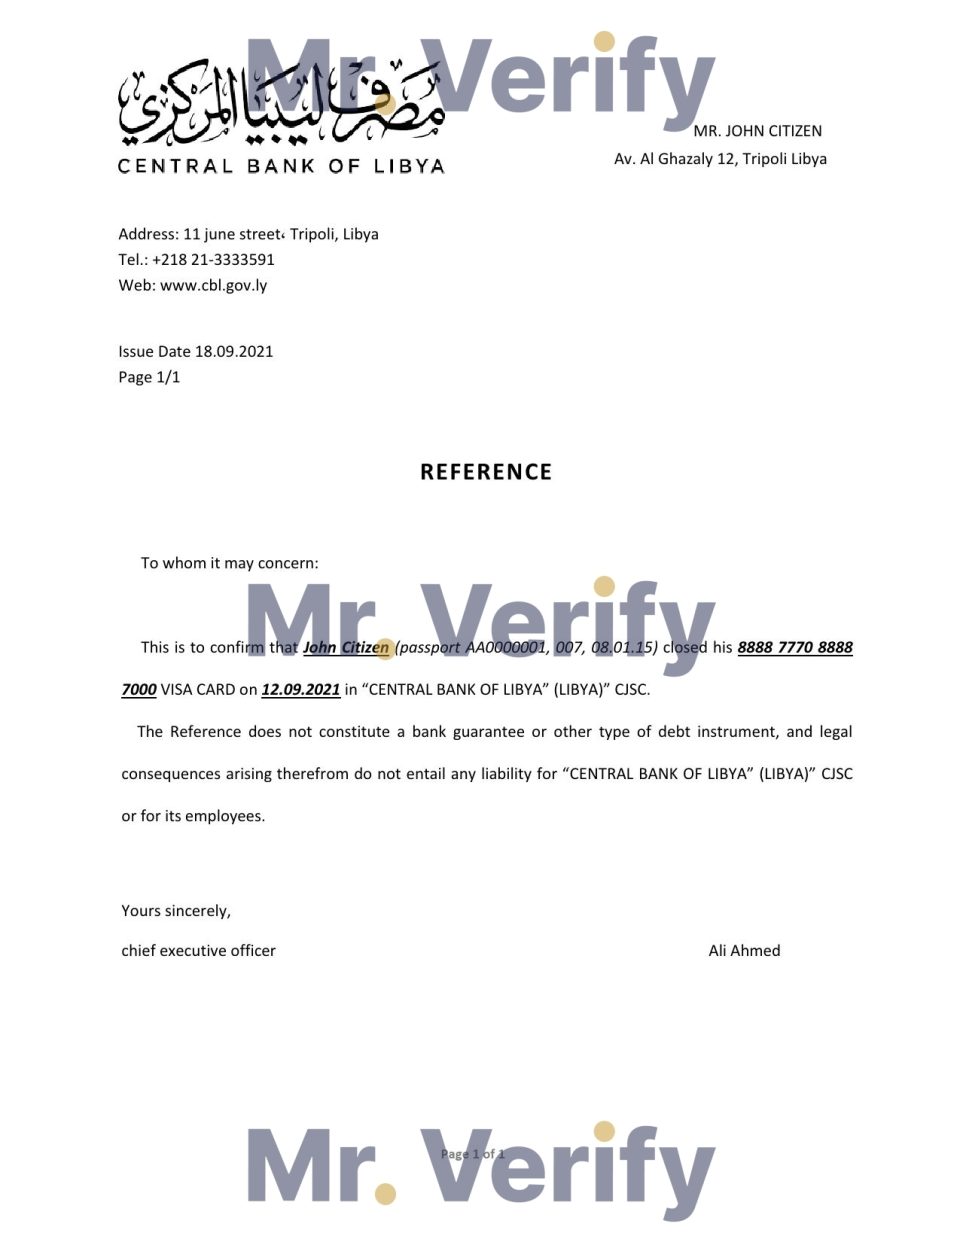 Download Libya Central Bank Reference Letter Templates | Editable Word